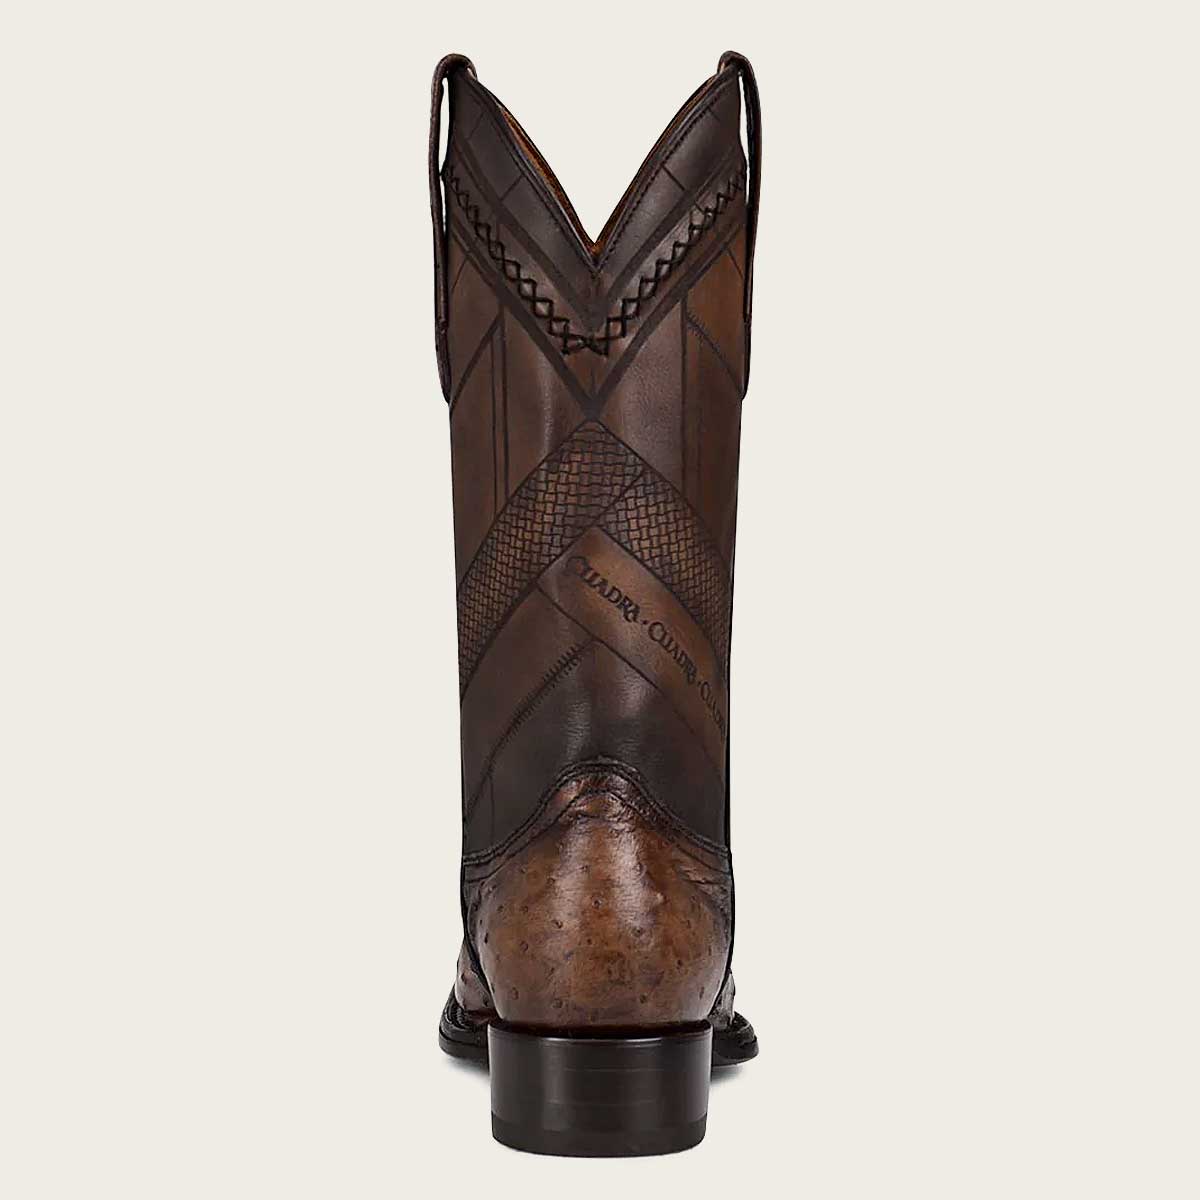 Engraved dark brown leather boot